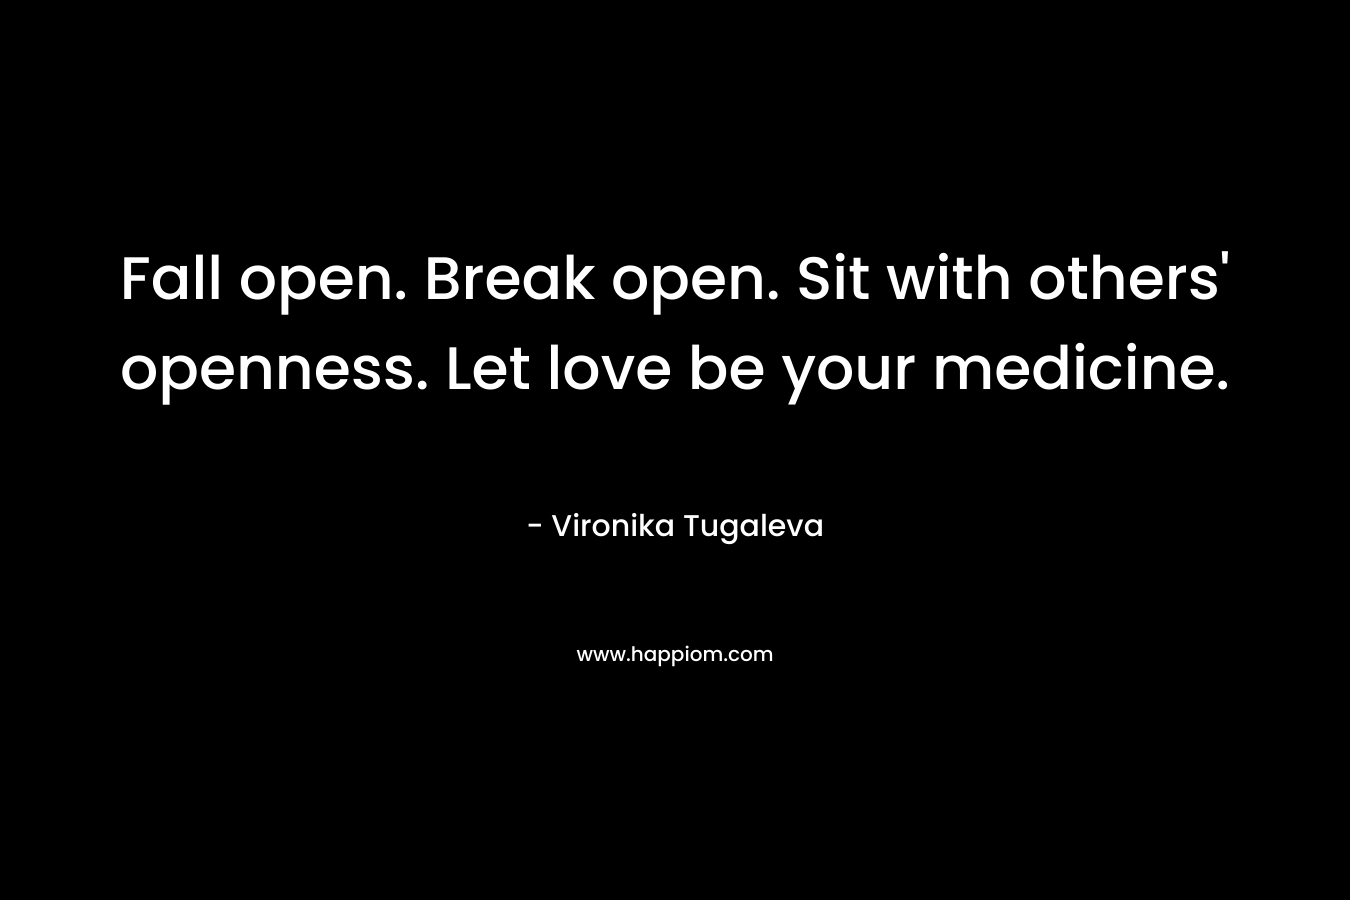 Fall open. Break open. Sit with others' openness. Let love be your medicine.